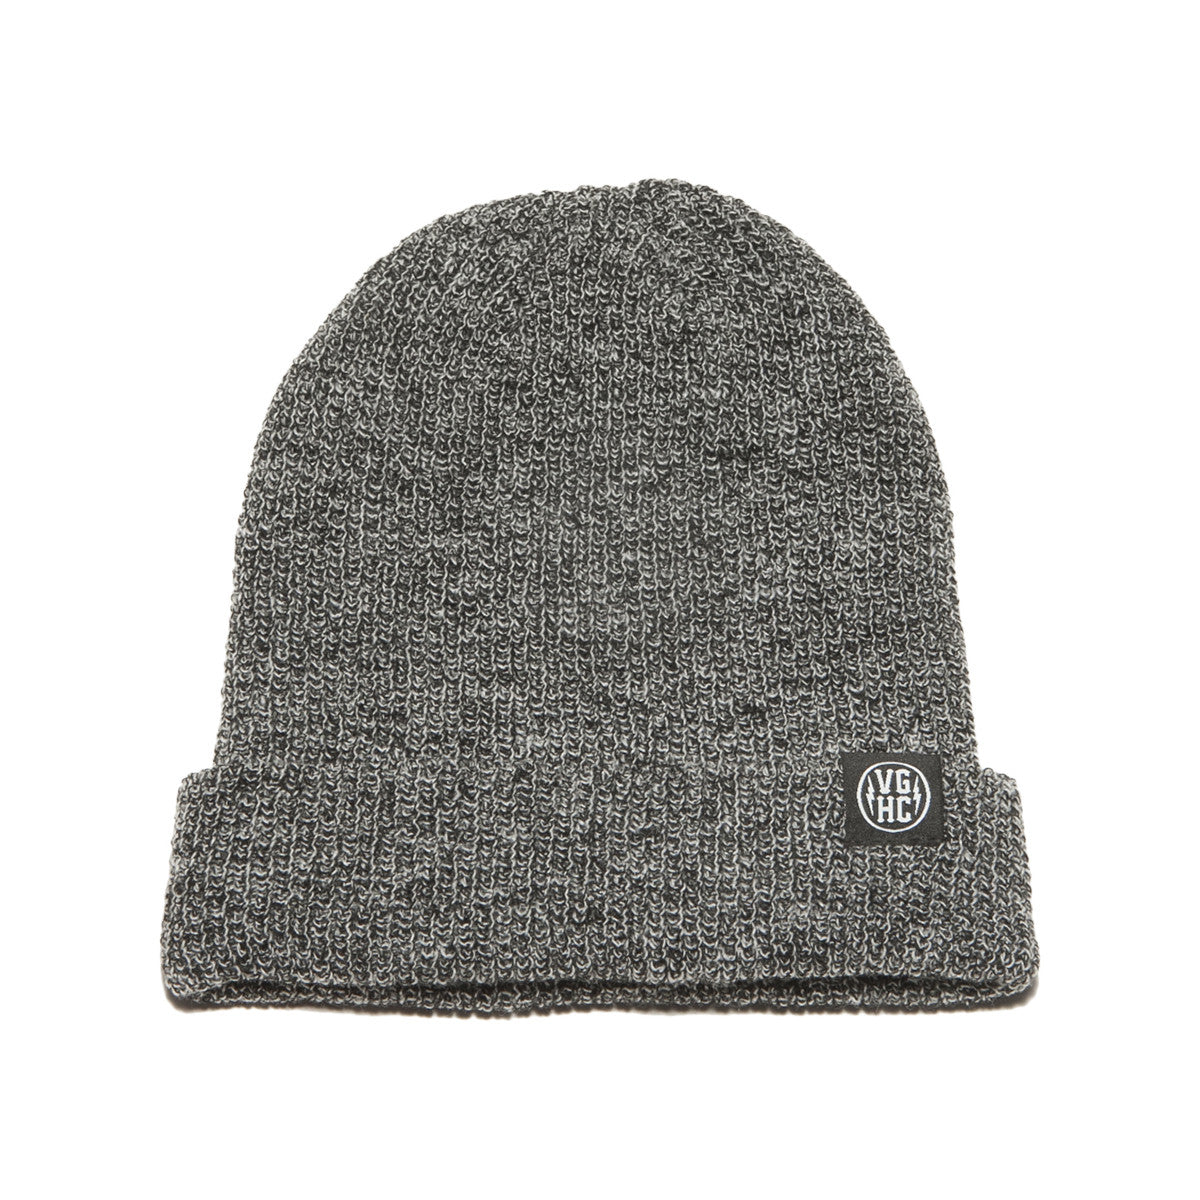 grey wooly hat